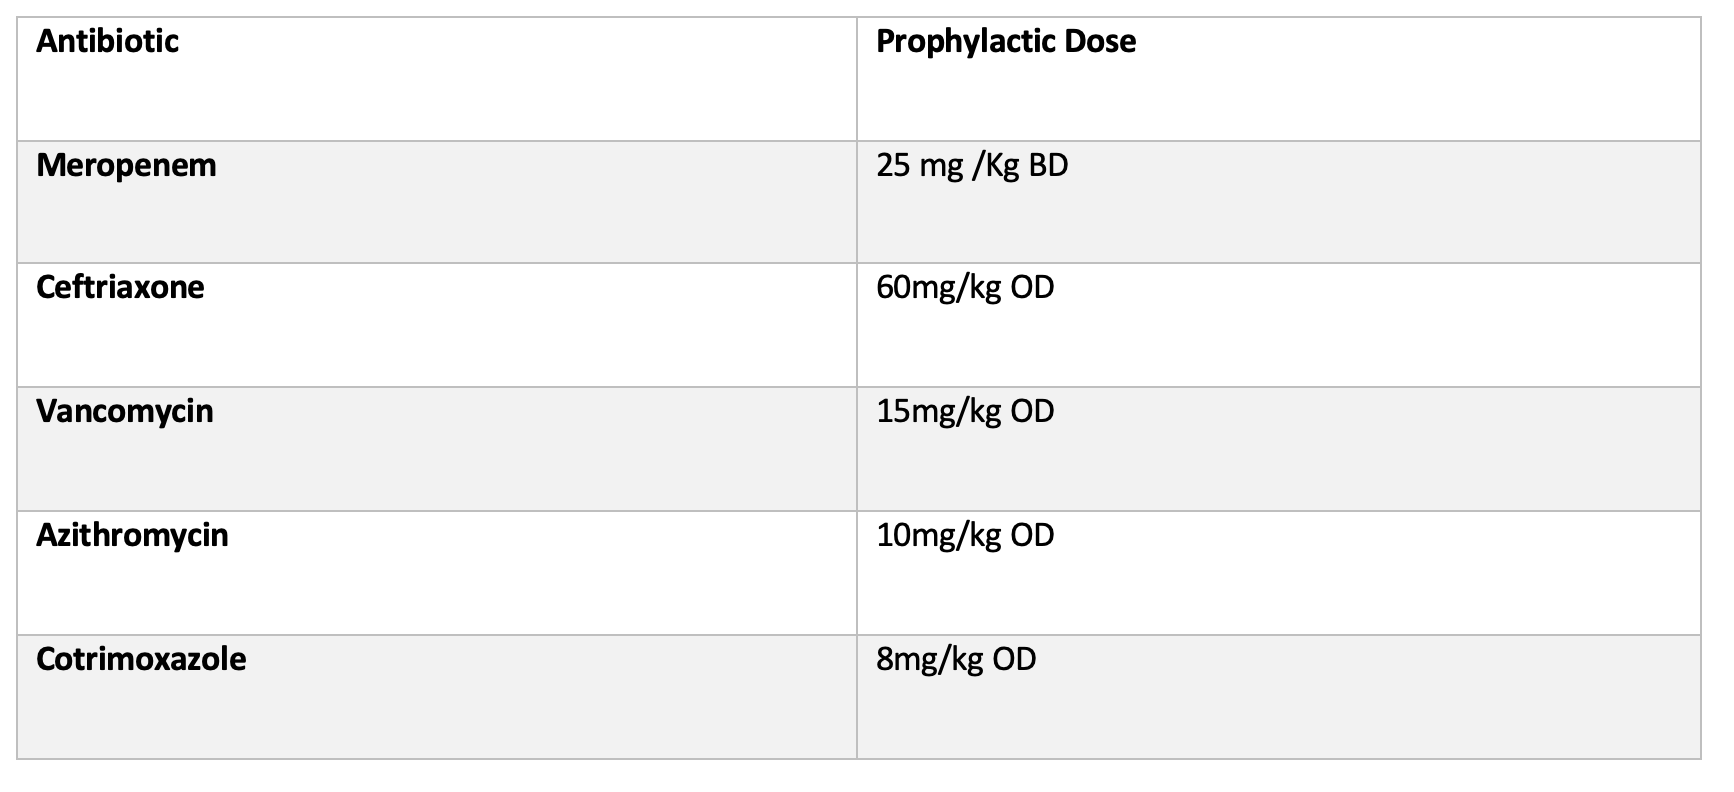 Figure 2. Suggested Prophylactic doses for this patient for interventions.